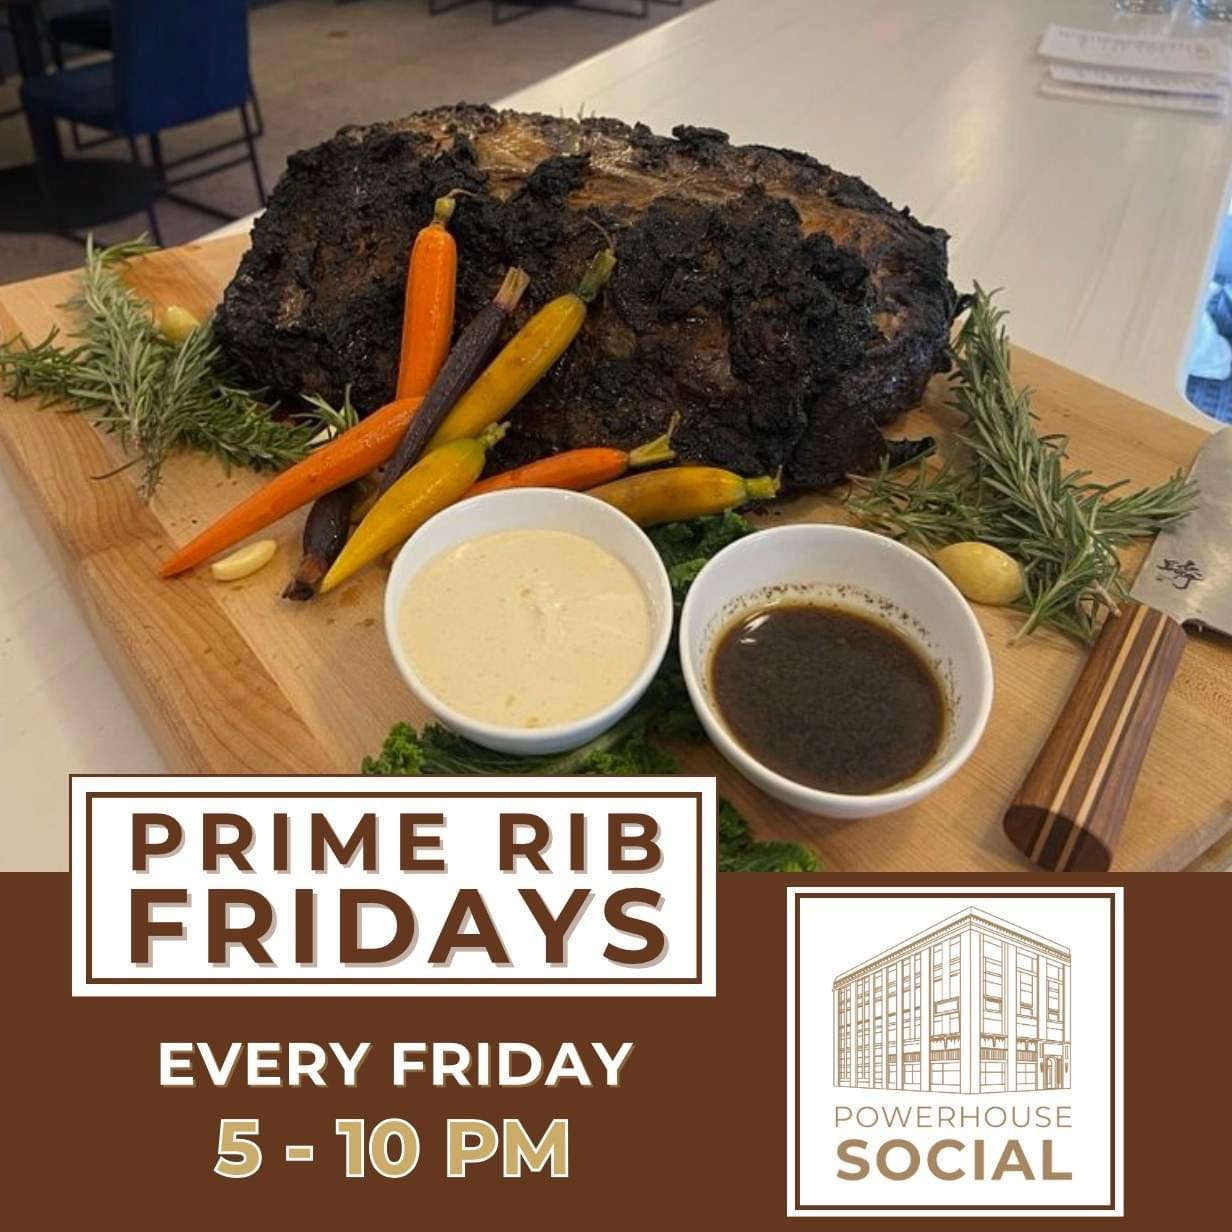 Join us tonight at Powerhouse Social for a delicious Prime Rib Special from 5-10 pm. Our expertly cooked cuts of meat will exceed your culinary expectations. Don't miss out on this delightful feast! 🍖😋🍽️ #PrimeRibFriday #PowerhouseSocial #Scottsbl